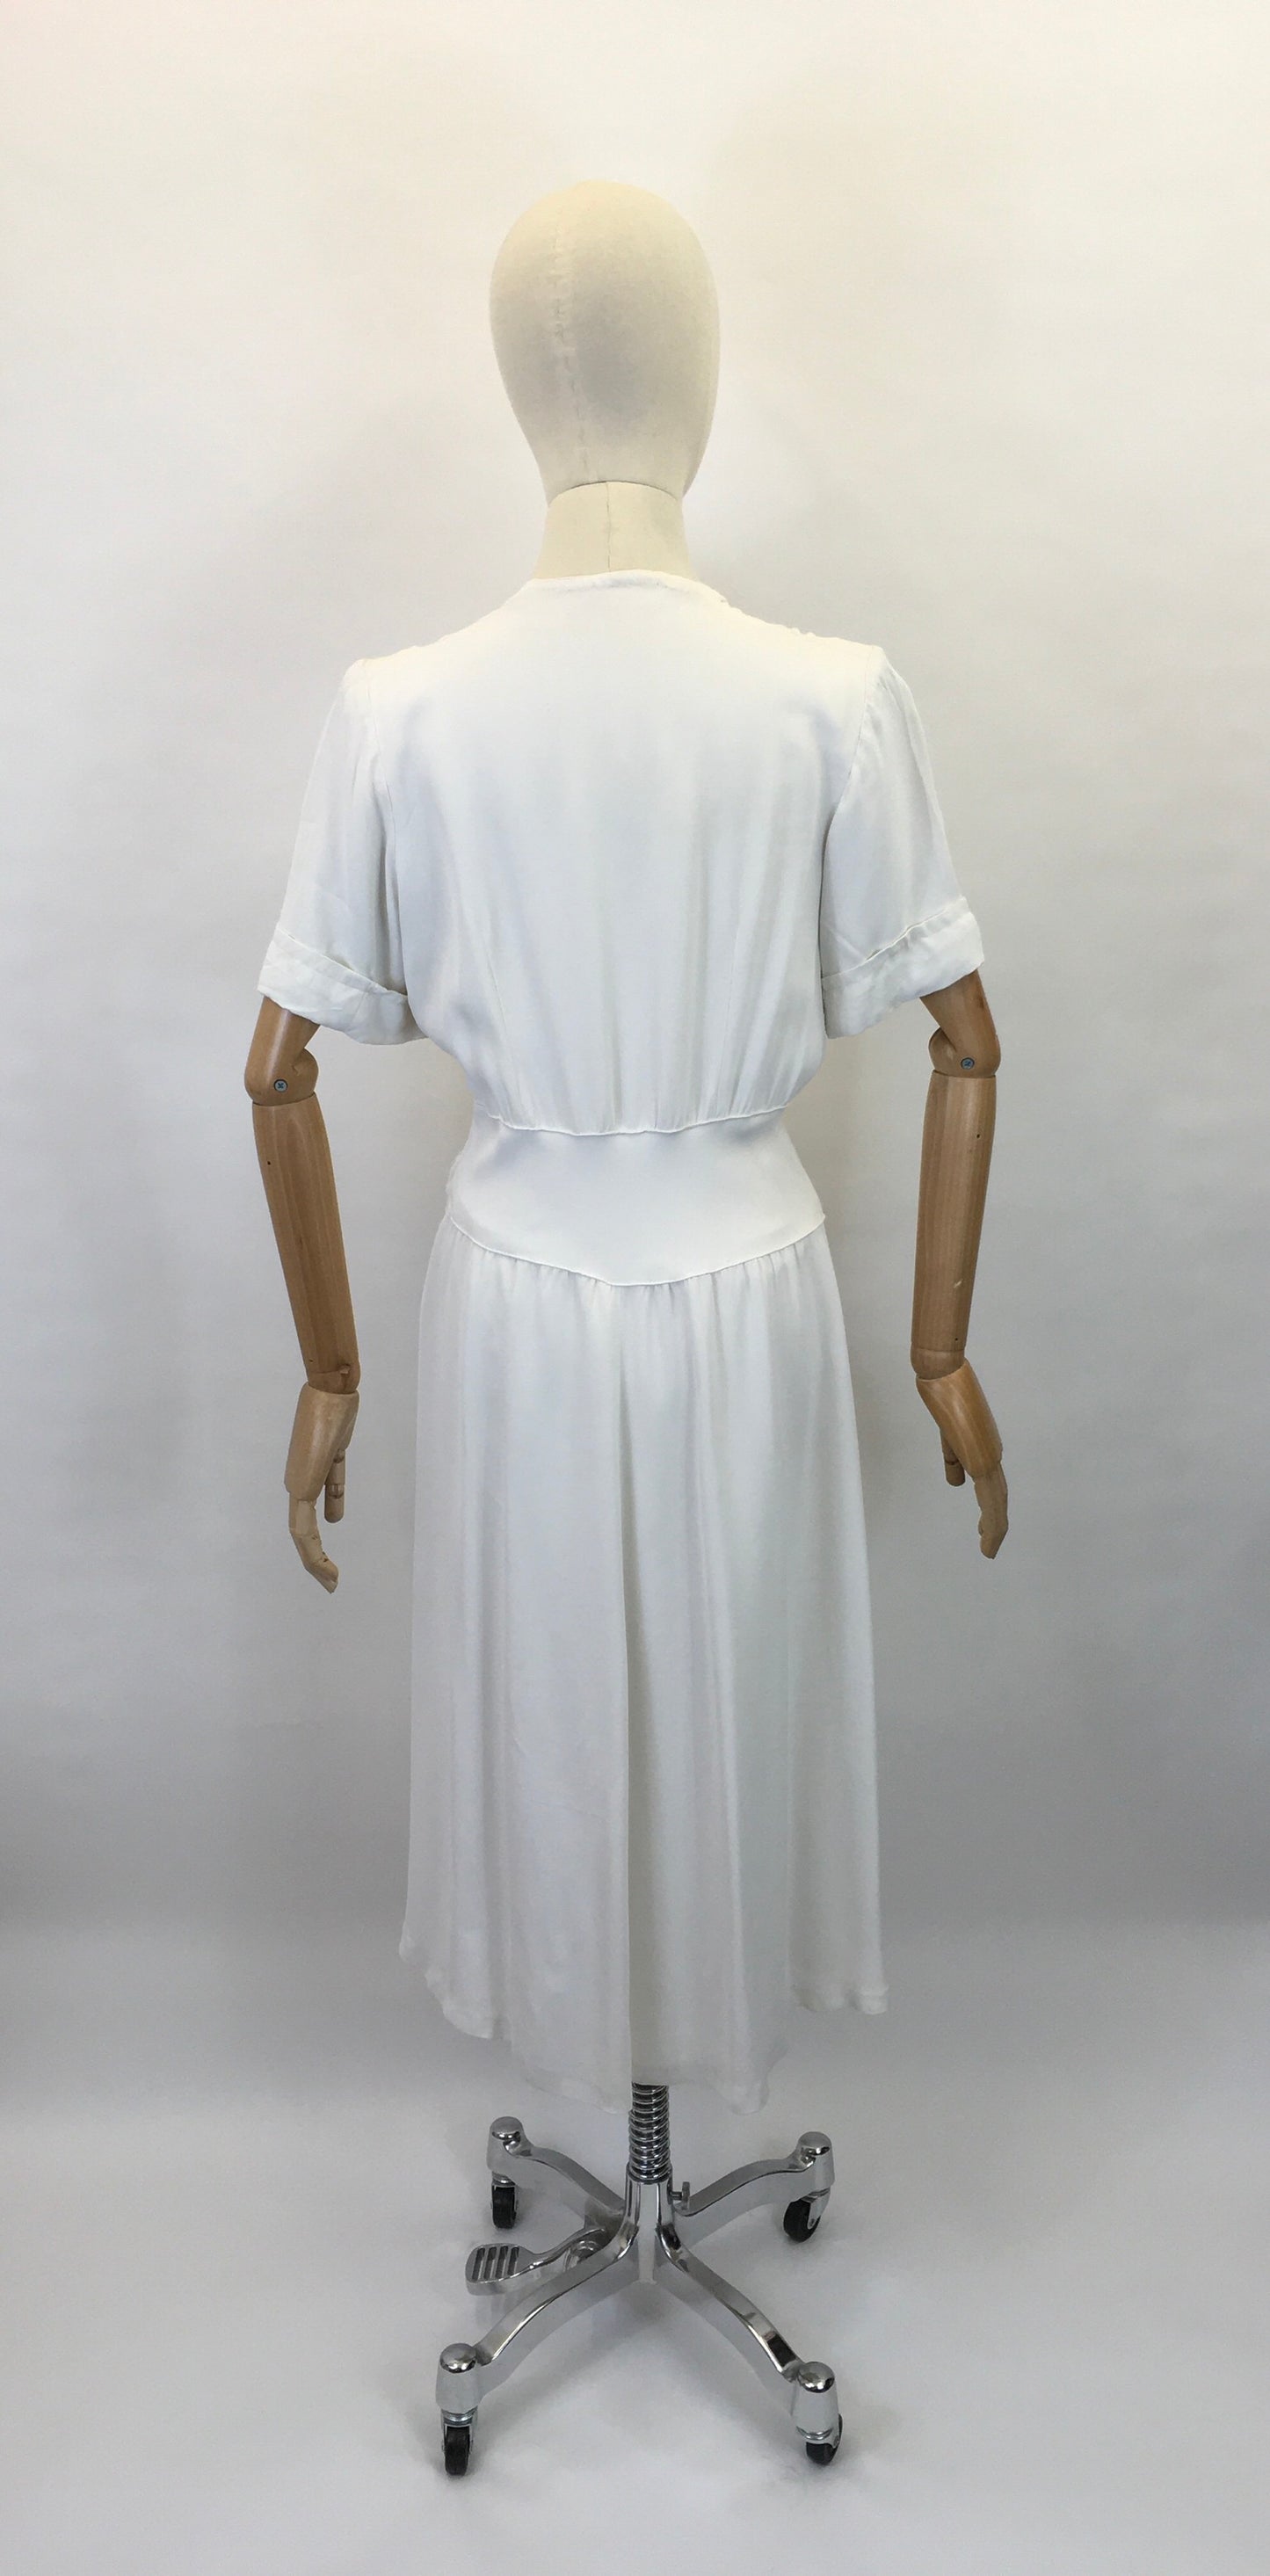 Original 1940’s STUNNING White Dress With Button Detailing  - Oozing a Classic 40’s Silhouette